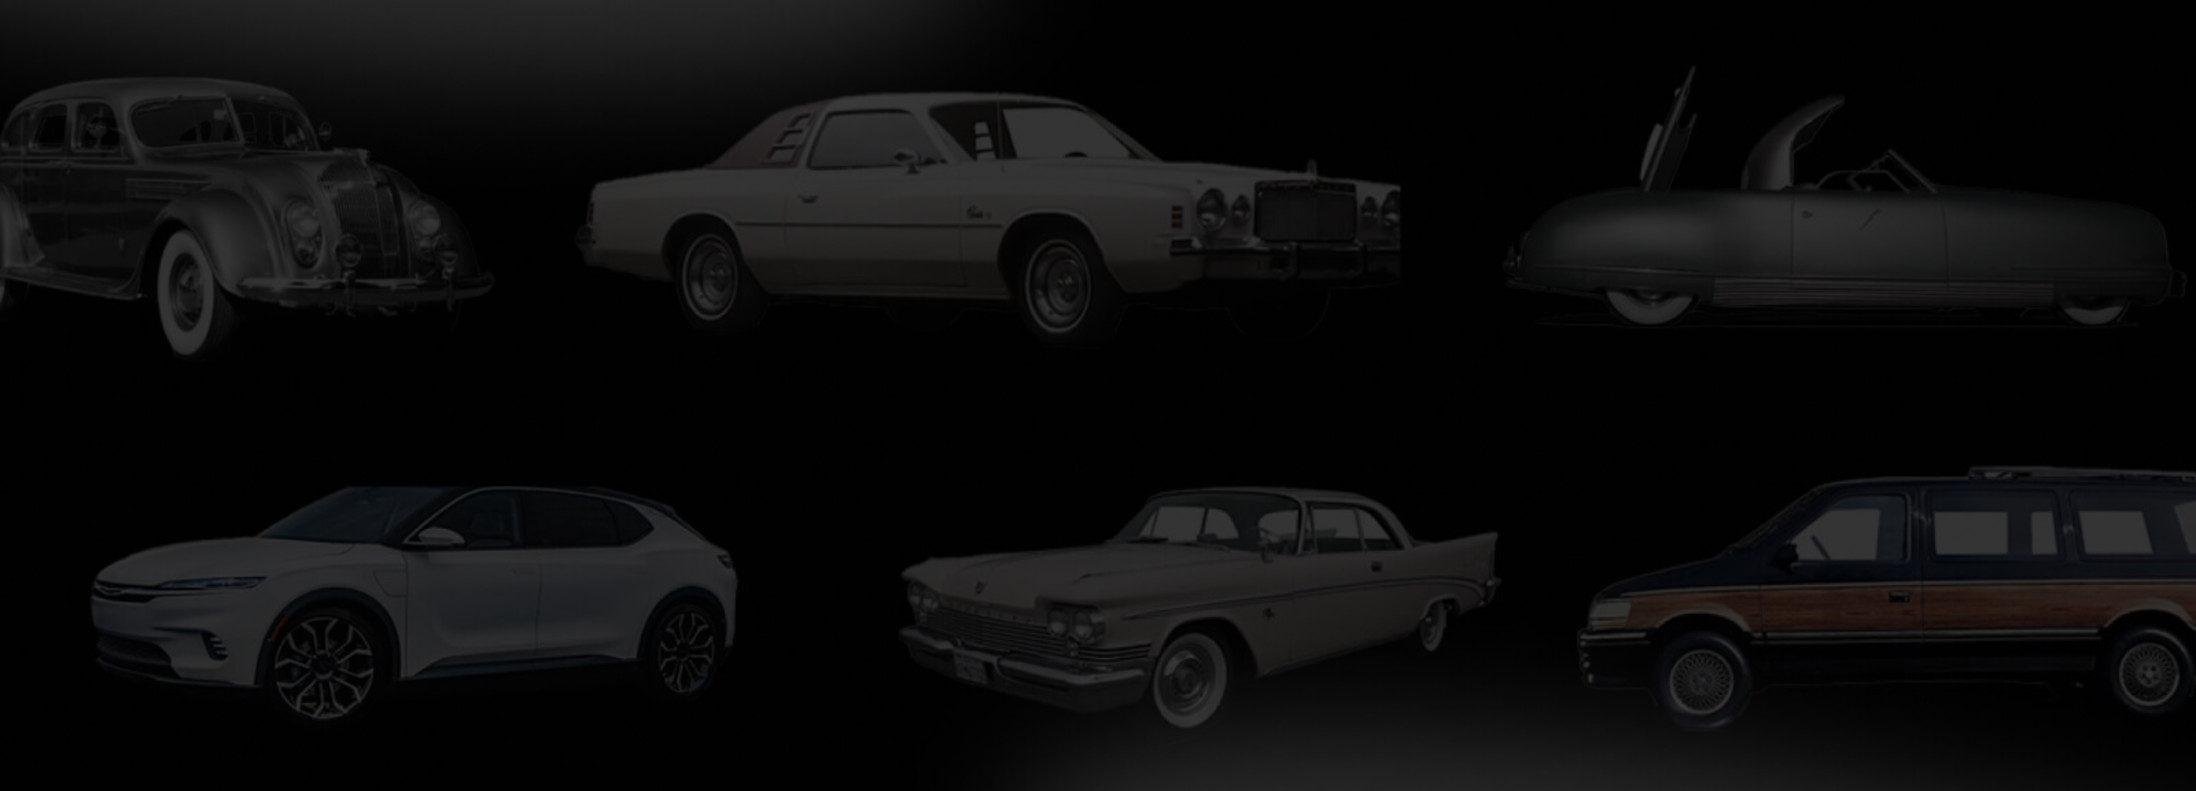 A collage of various Chrysler car models in a dark setting.